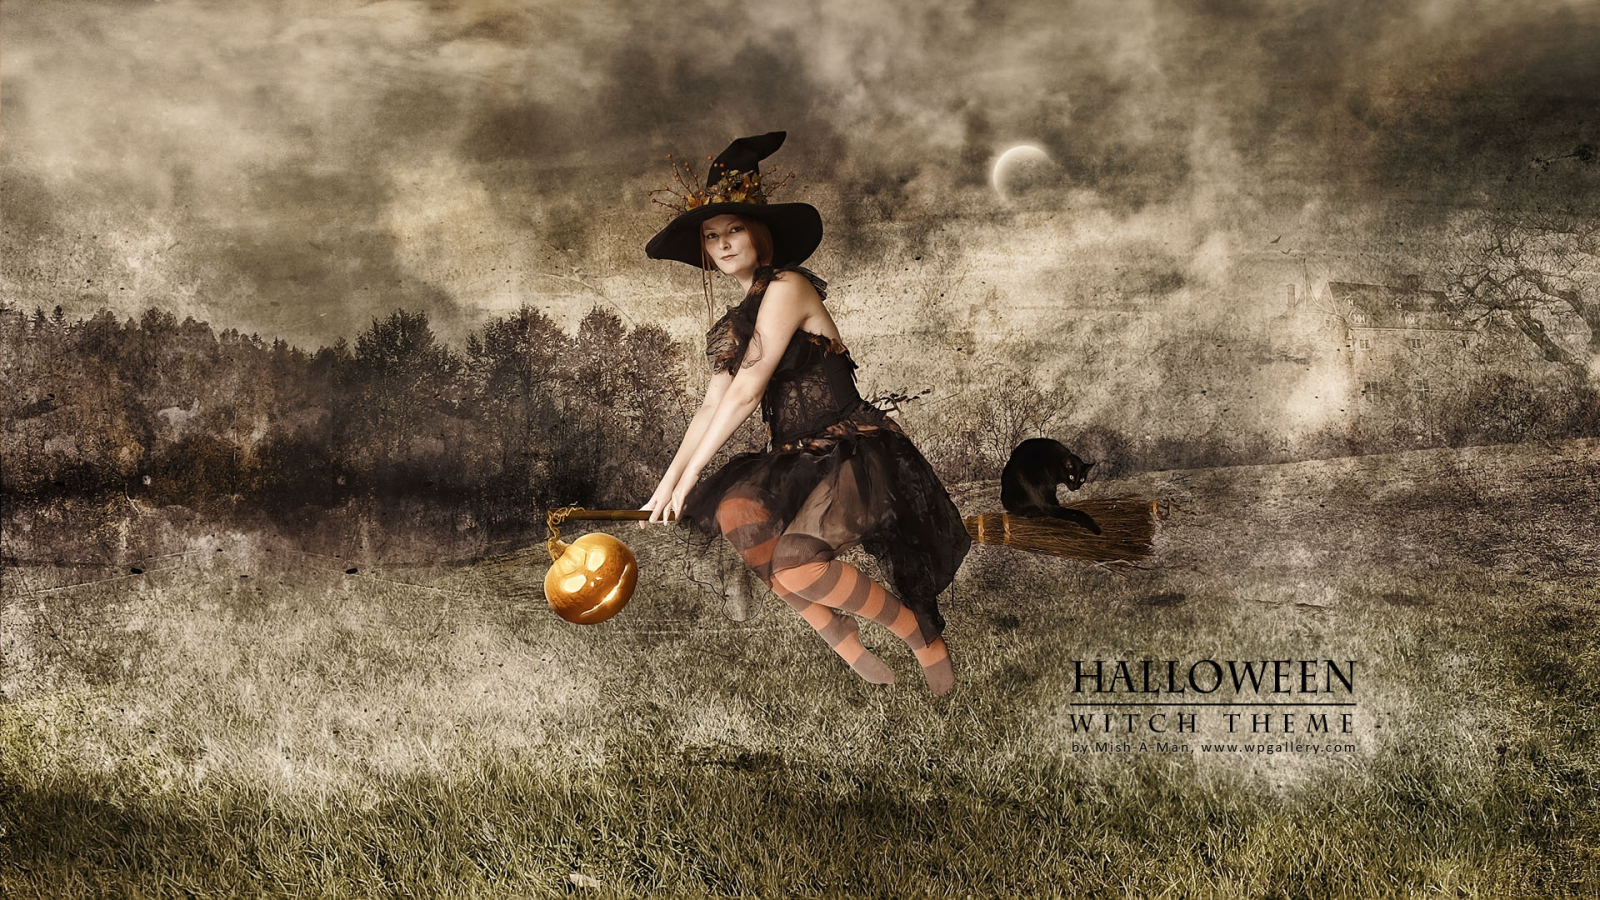 Halloween - Witch theme for 1600 x 900 HDTV resolution